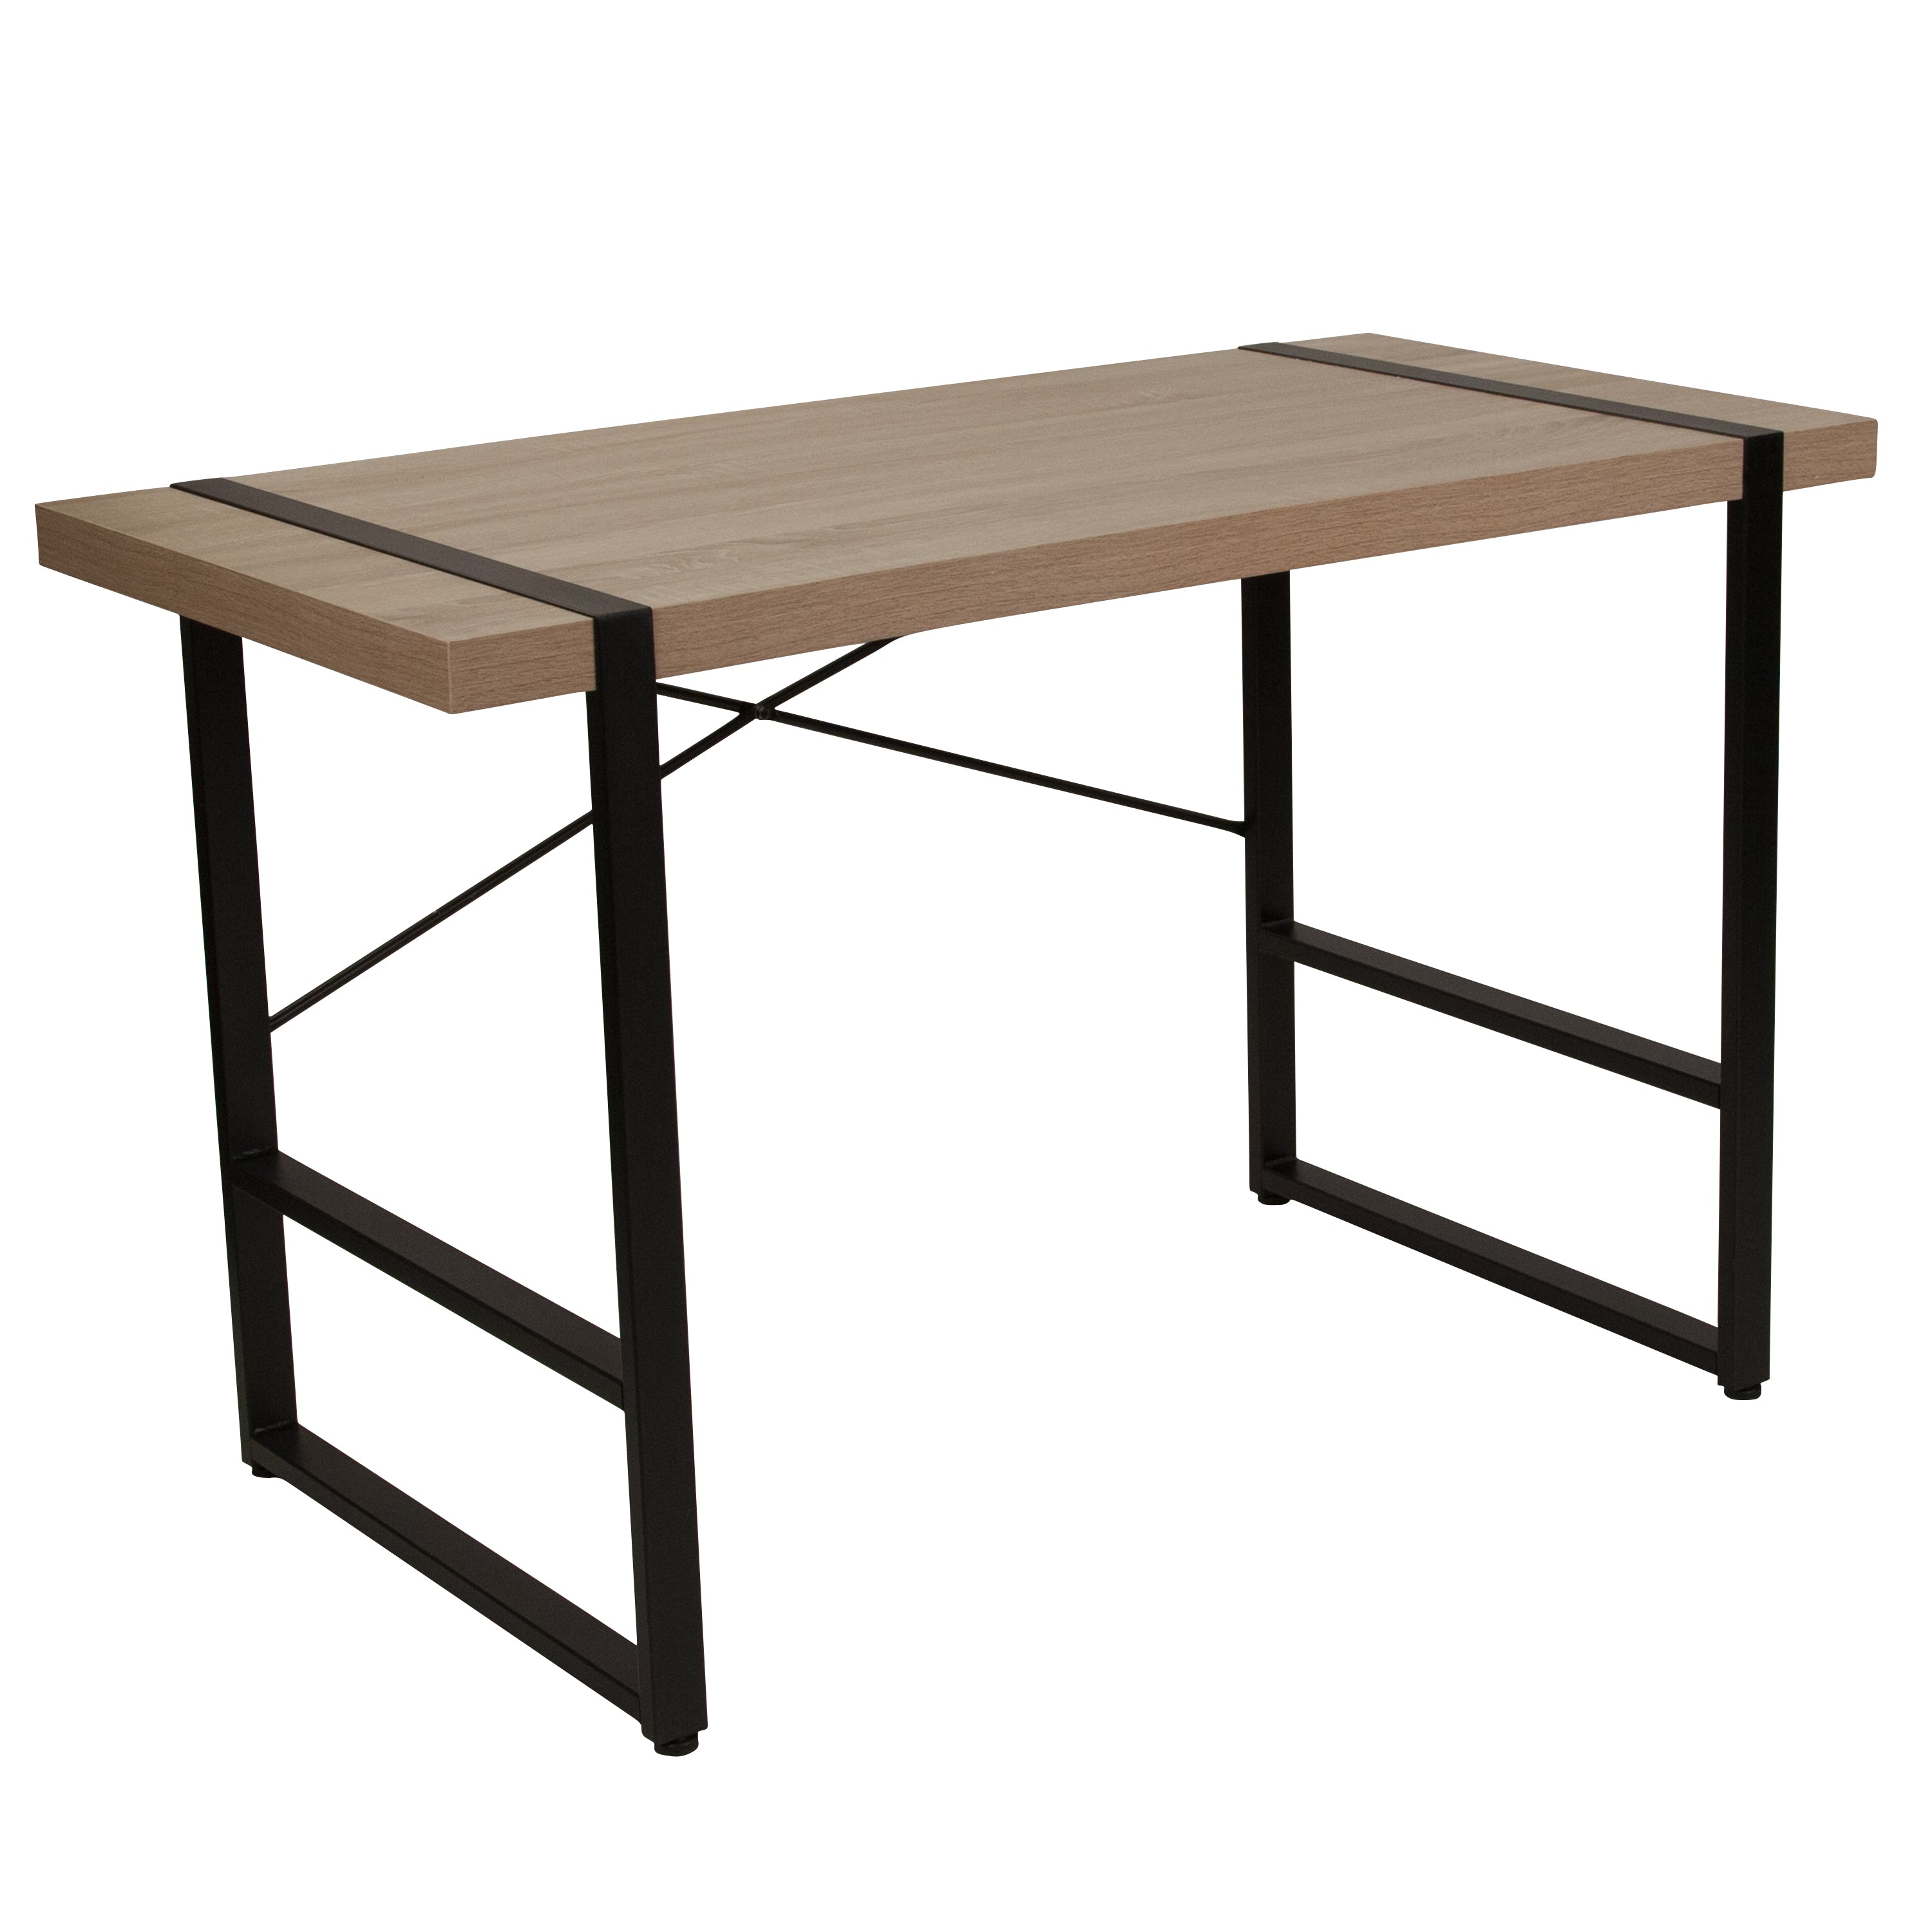 Hanover Park Wood Grain Console Table with Cross Brace Backing-Console Table-Flash Furniture-Wall2Wall Furnishings